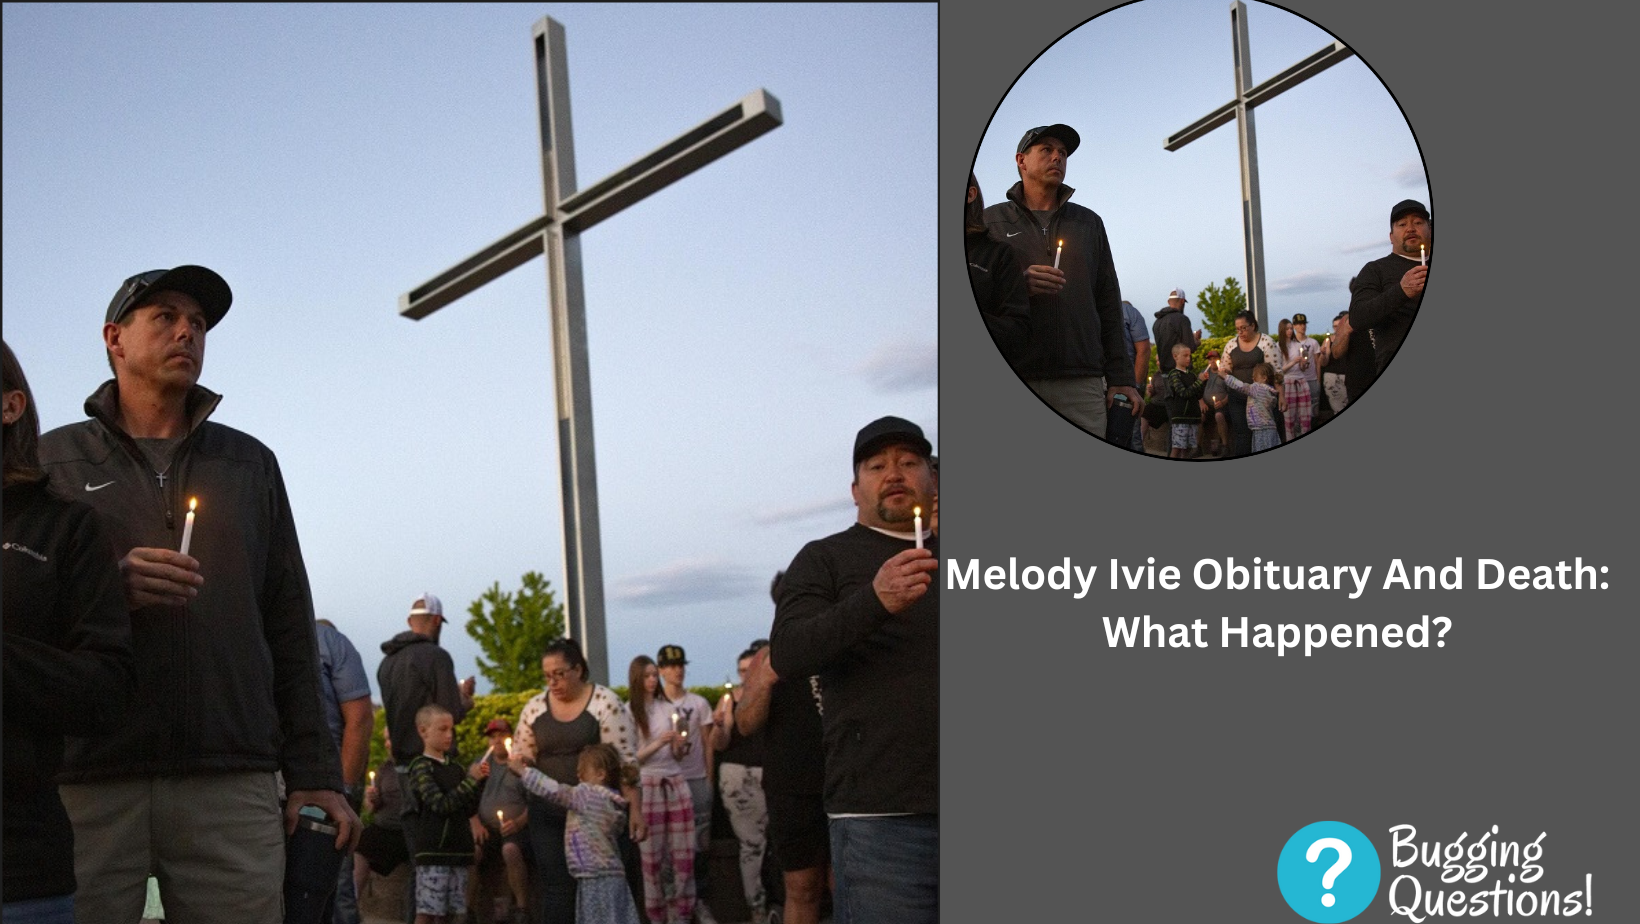 Melody Ivie Obituary And Death: What Happened?